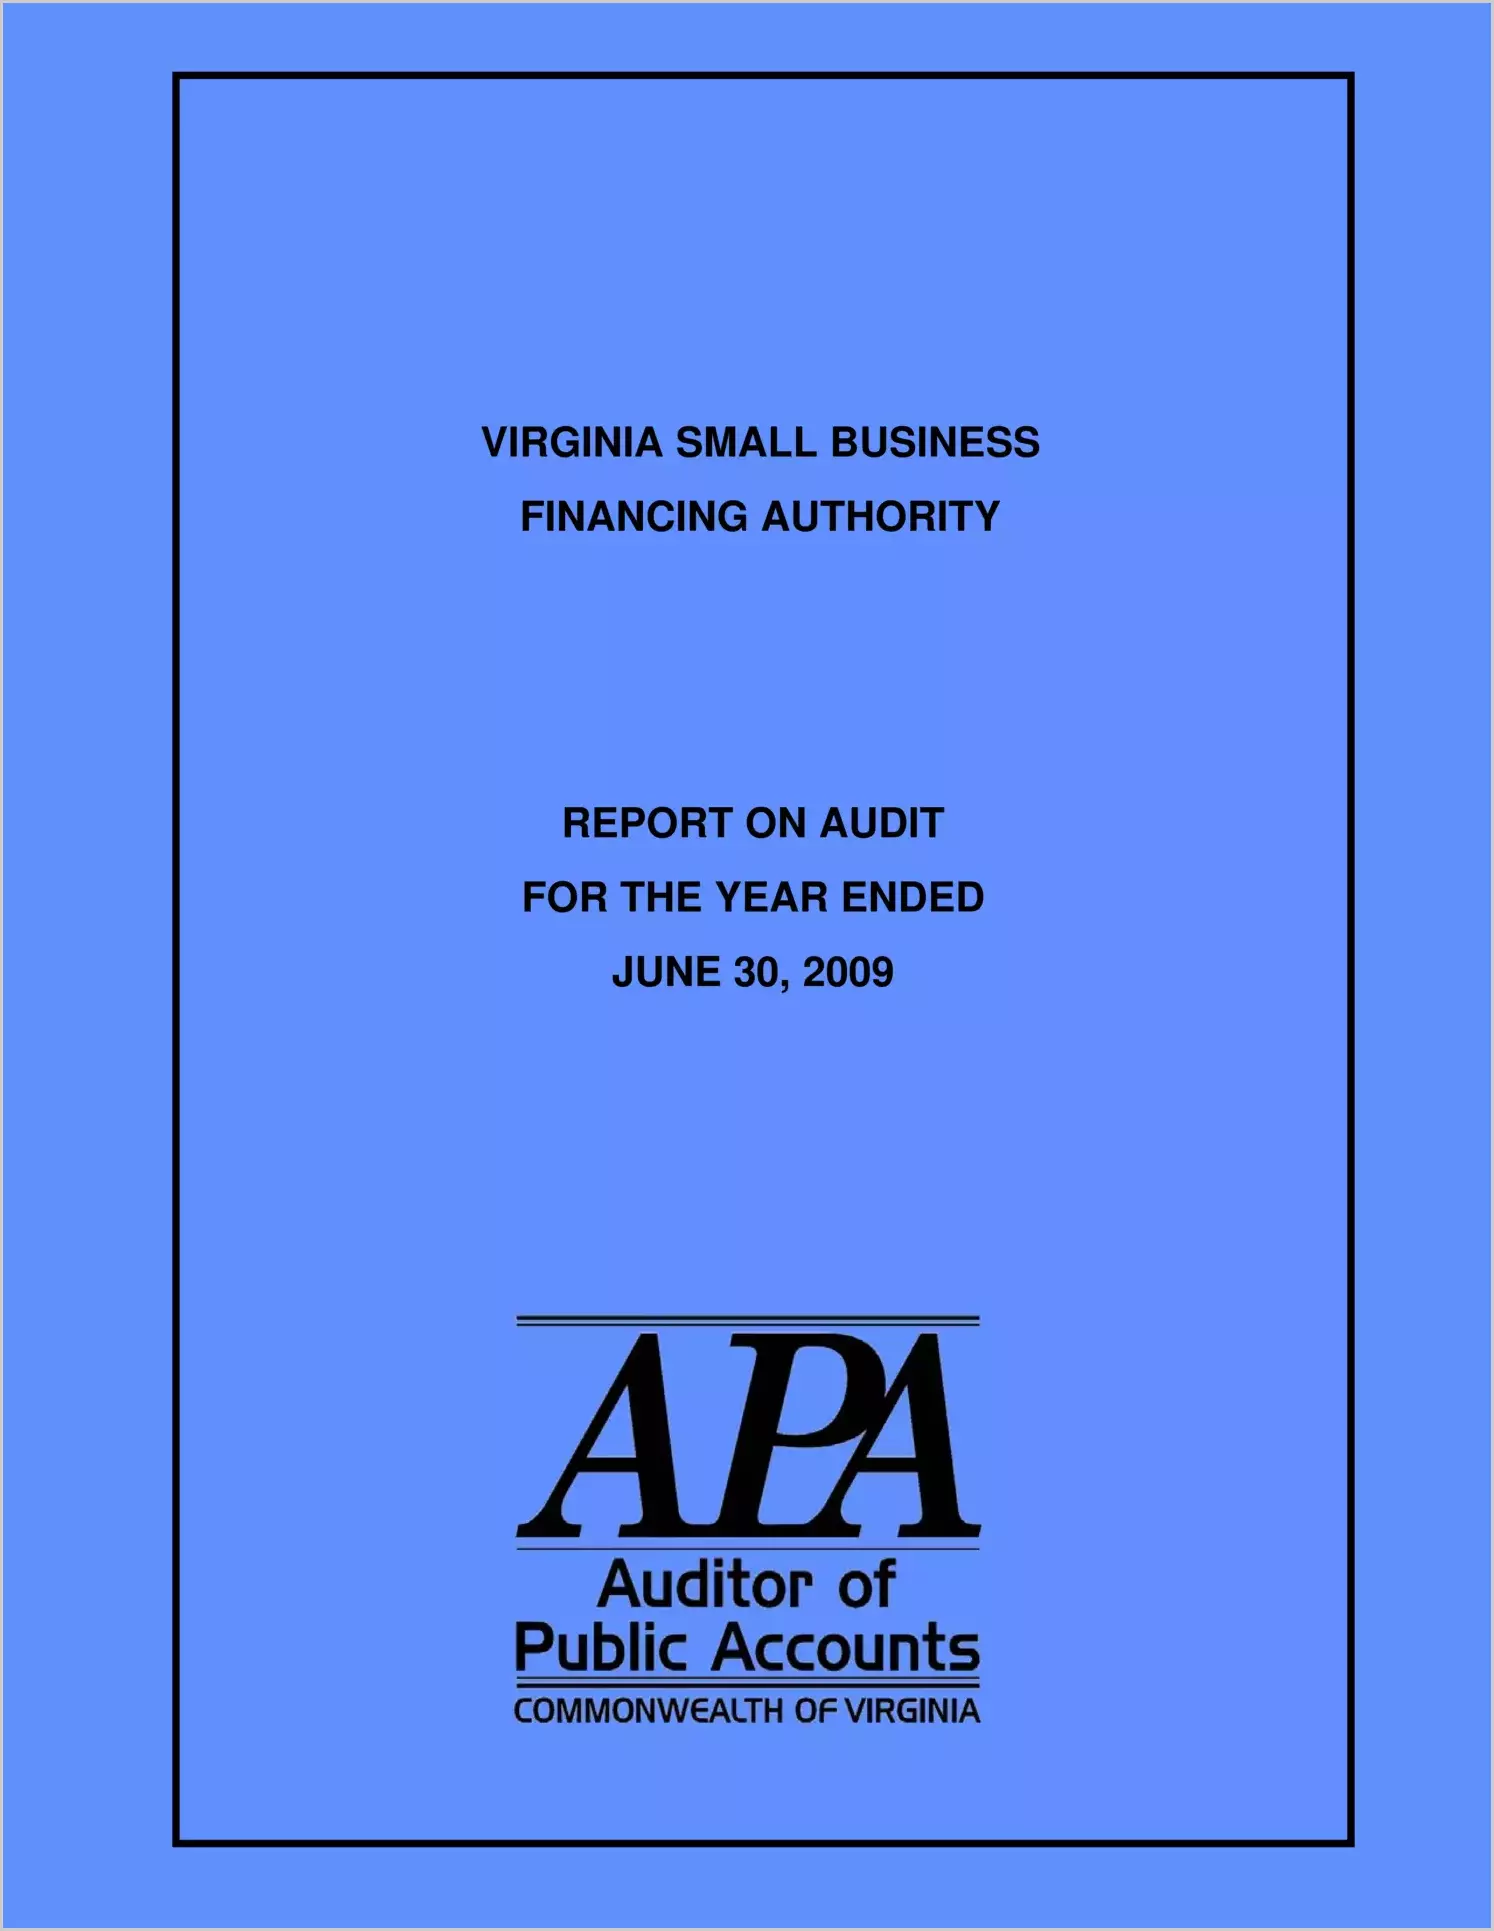 Virginia Small Business Financing Authority for the year ended June 30, 2009